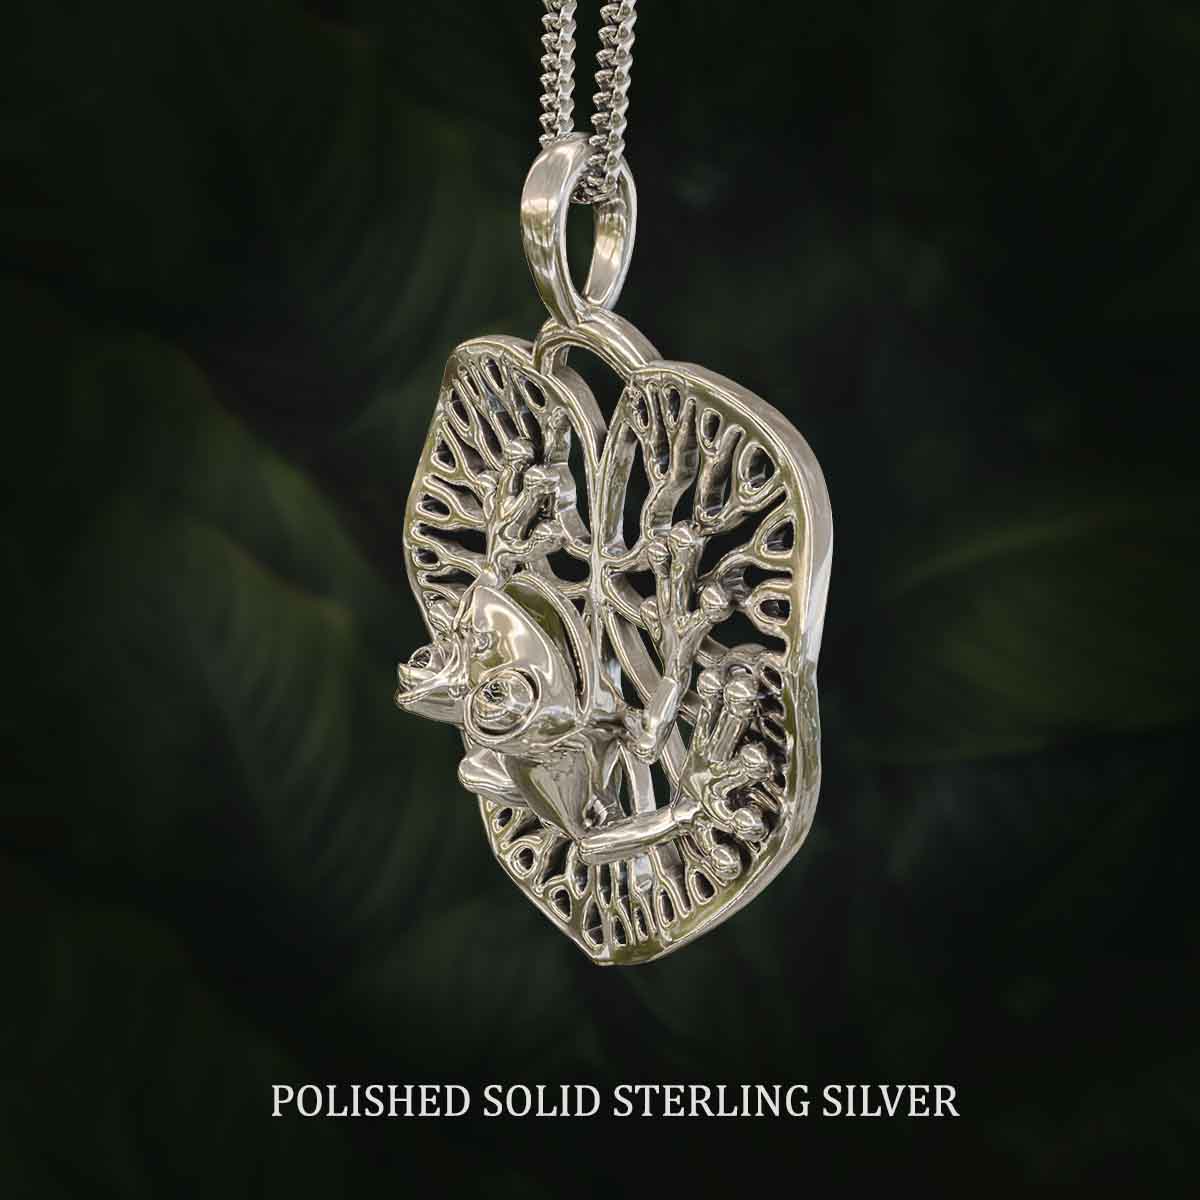 Polished-Solid-Sterling-Silver-Frog-on-a-Lilypad-Pendant-Jewelry-For-Necklace